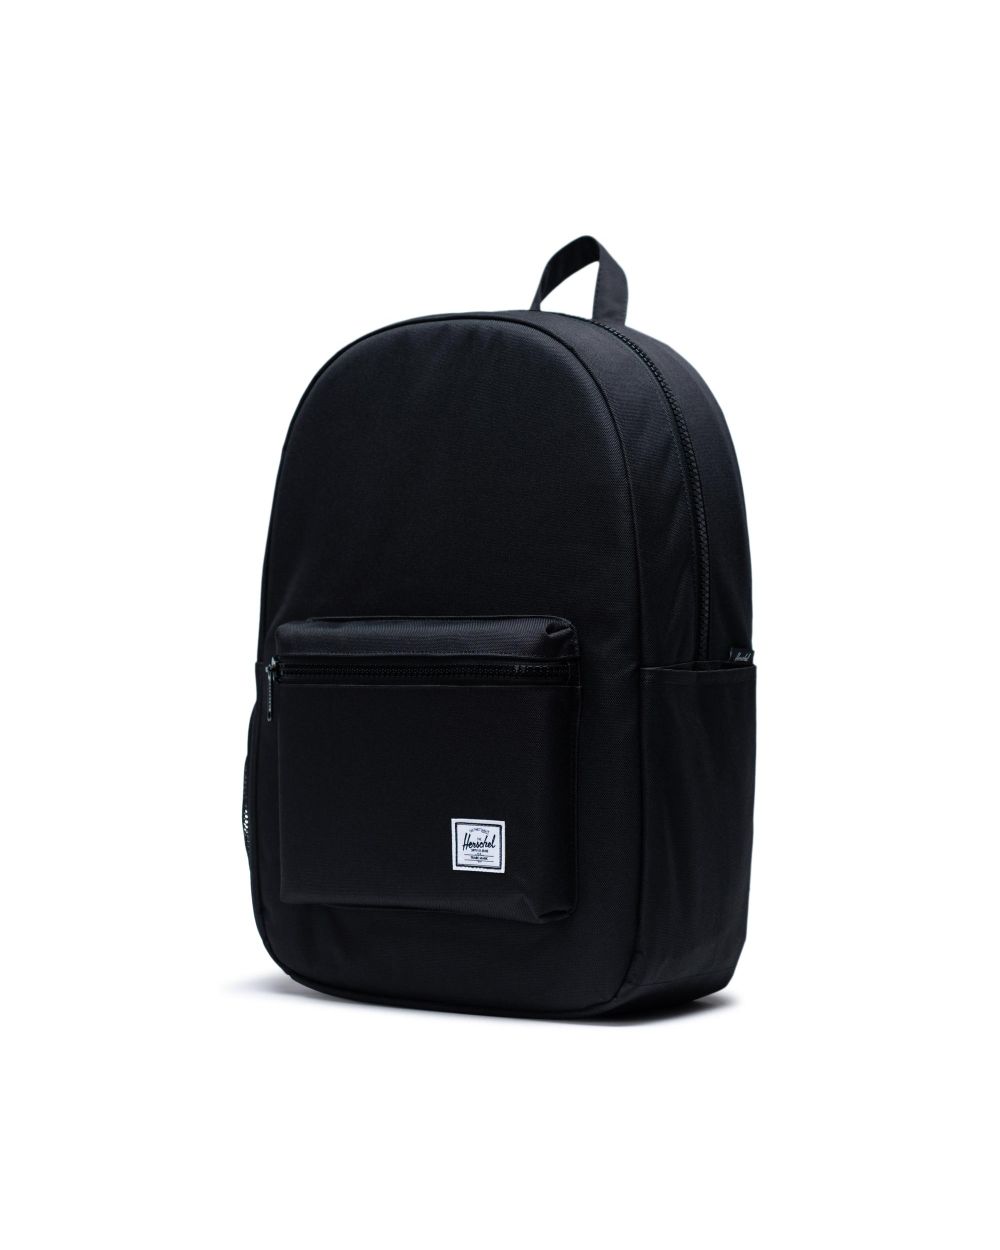 Settlement Backpack Sprout 26L | Herschel Supply Co.